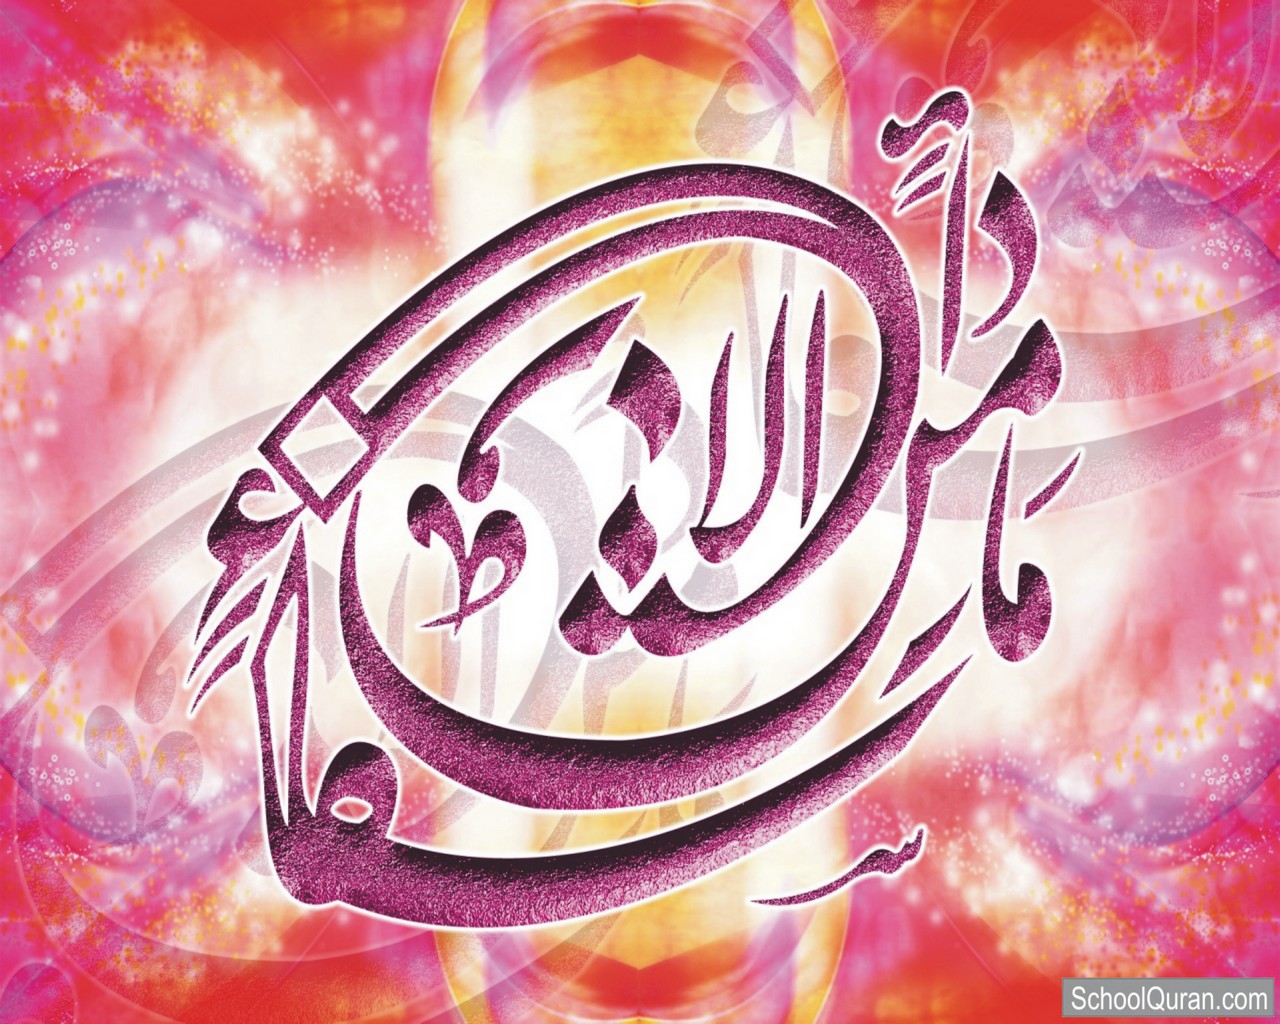 Islamic Wallpapers Hd - Graphic Design , HD Wallpaper & Backgrounds